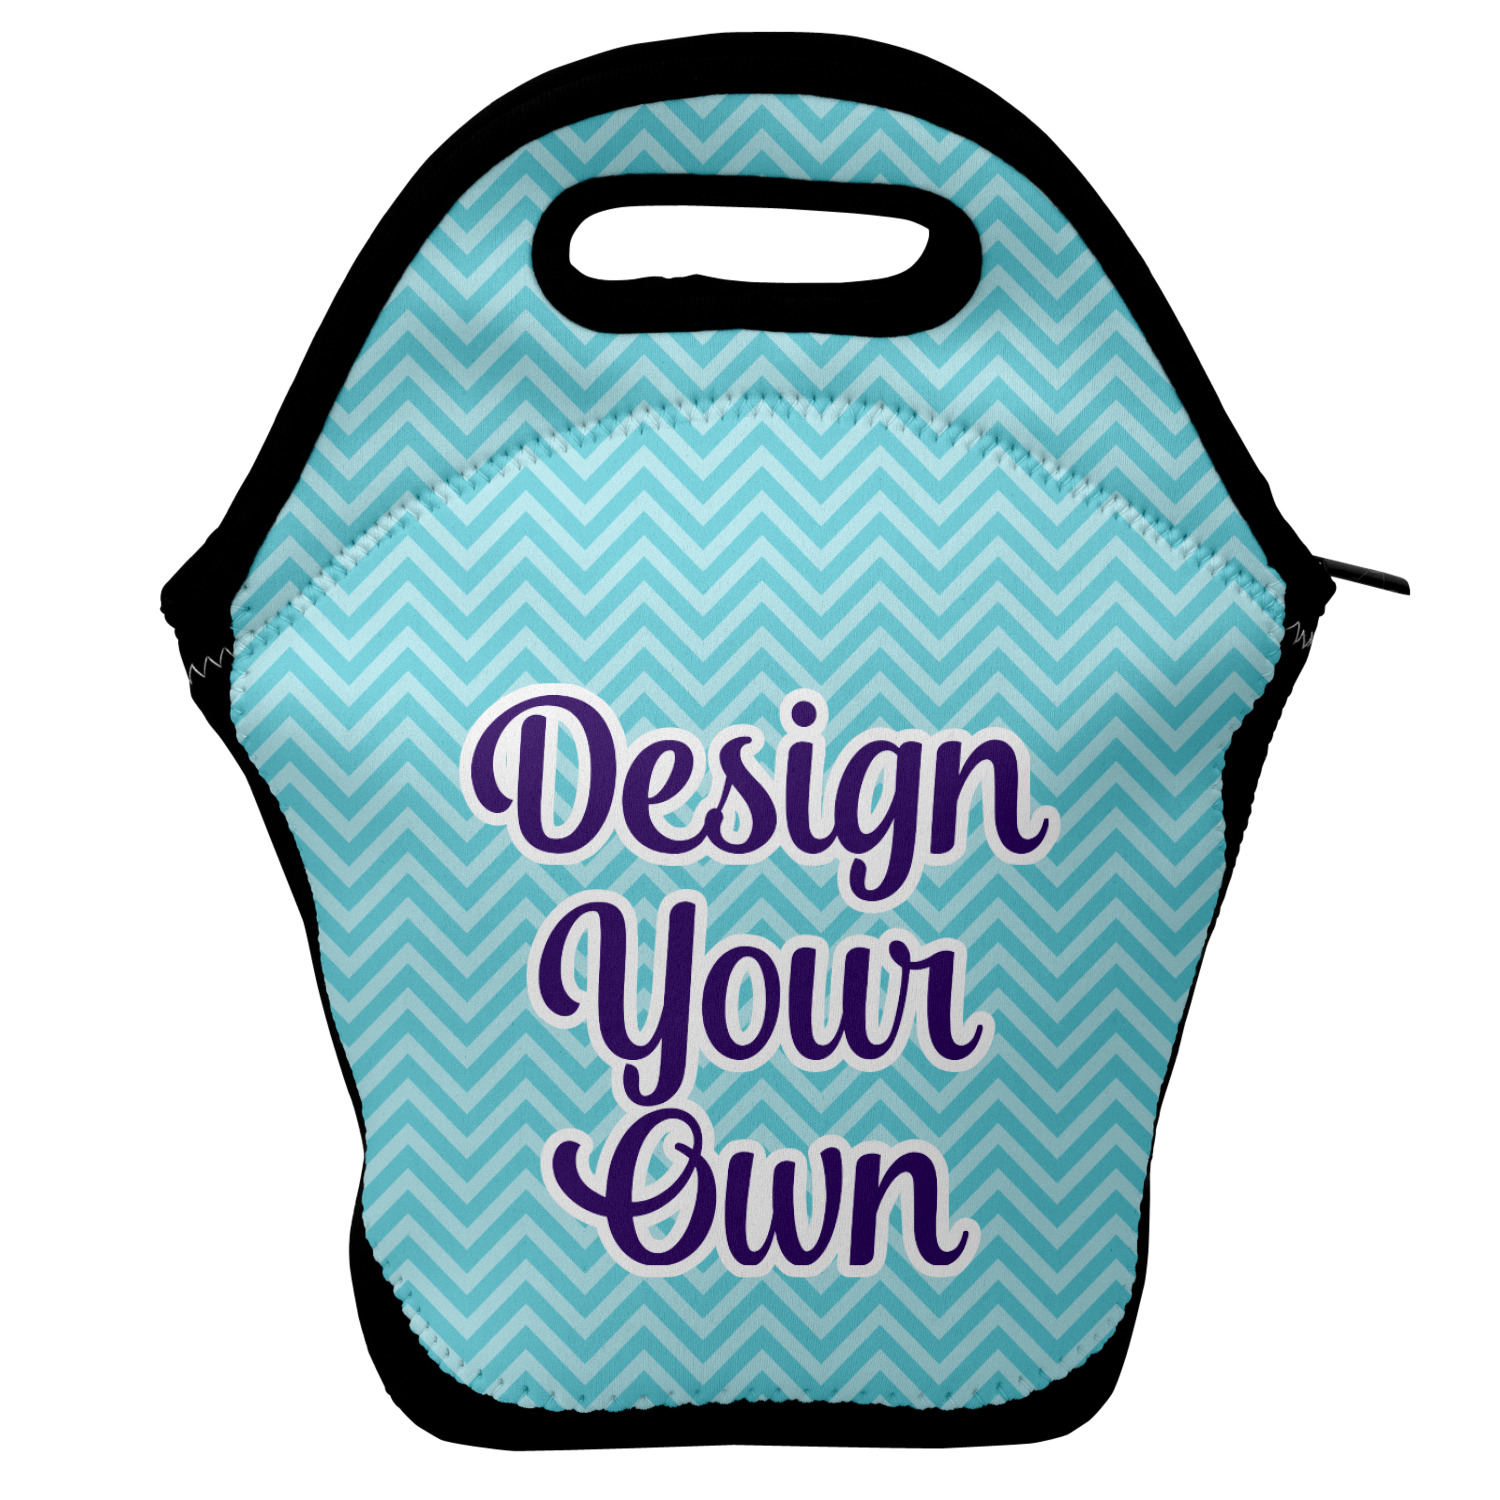 teal lunch tote